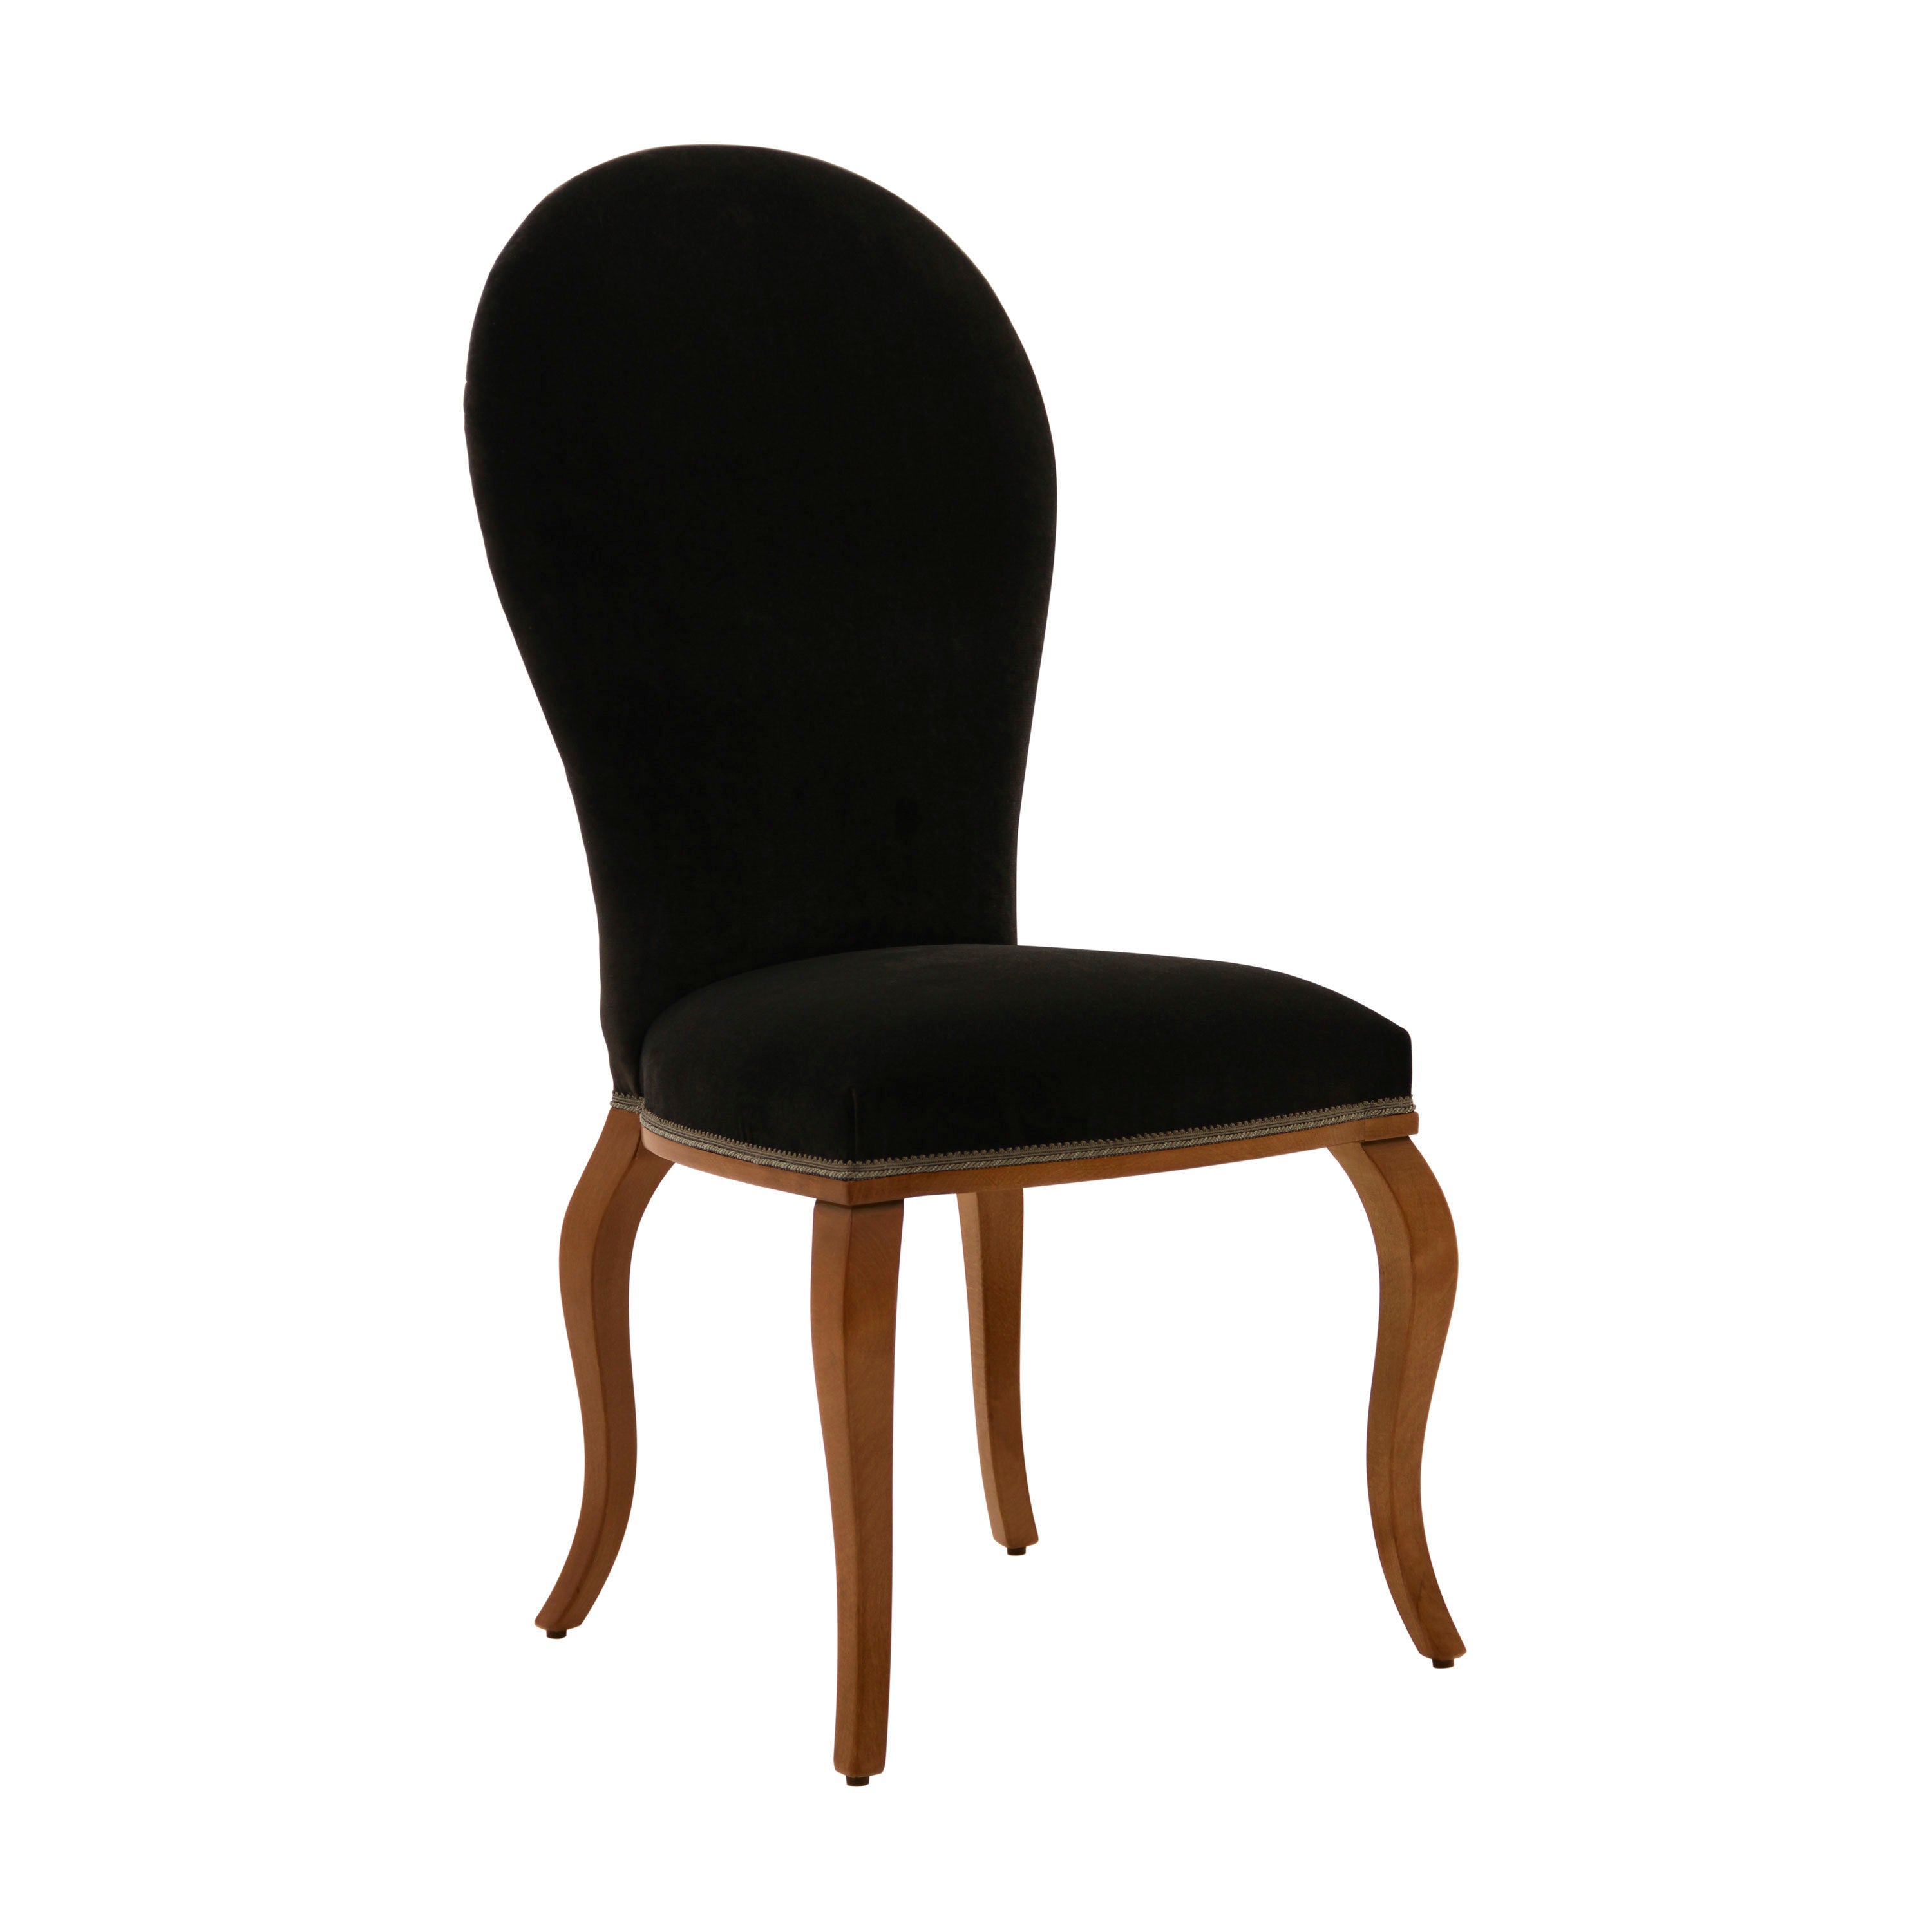 Sophia Bespoke Upholstered Modern Contemporary Dining Chair MS180S Custom Made To Order